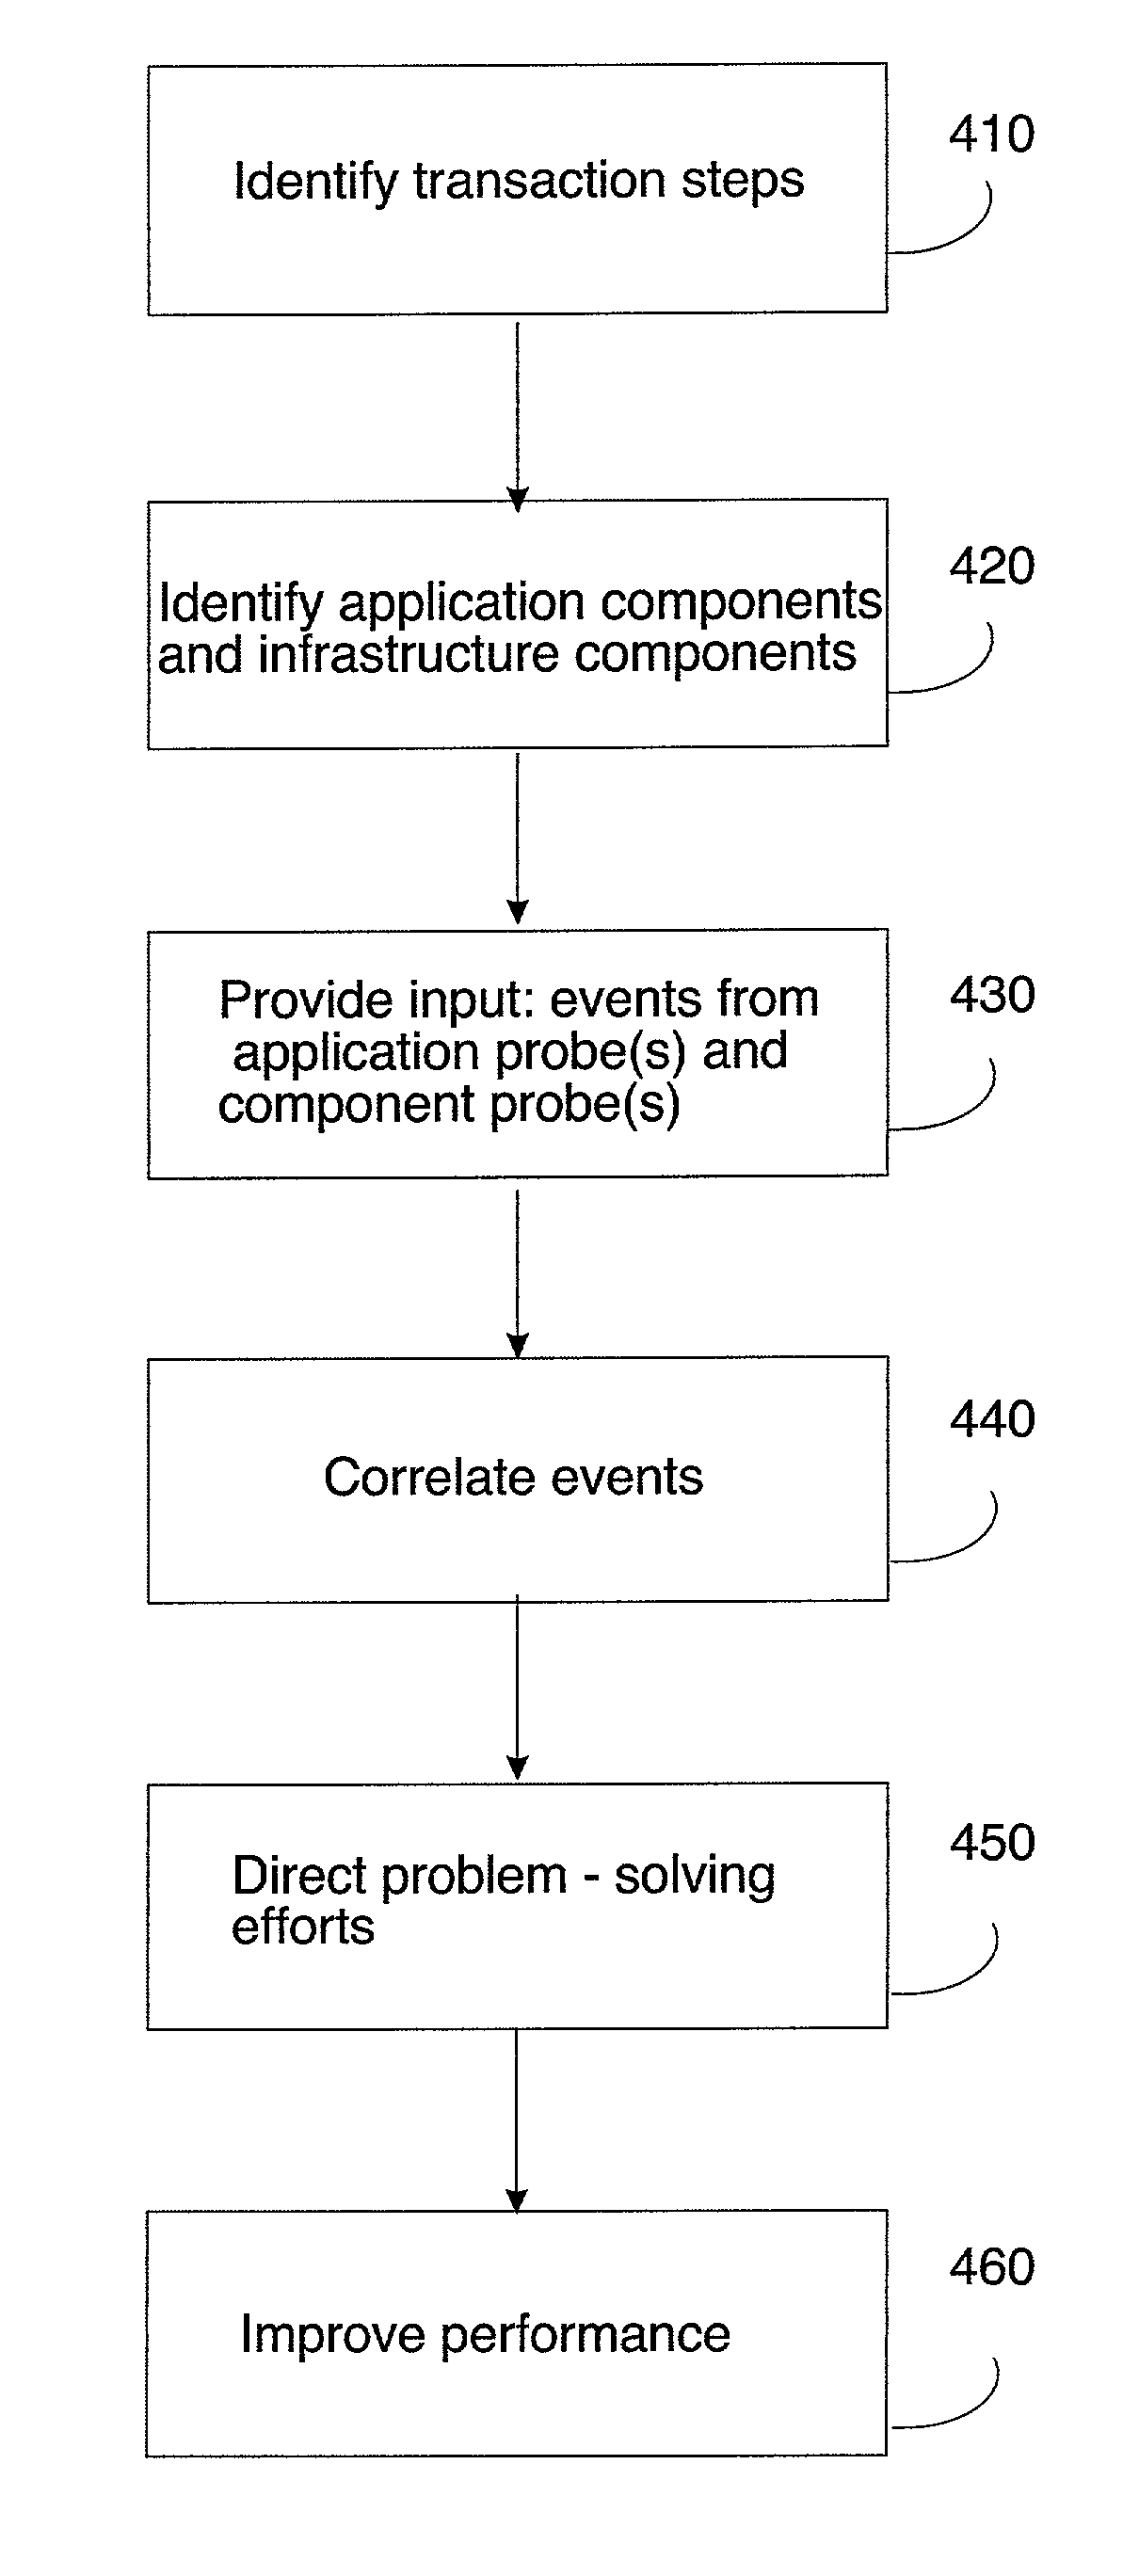 System for correlating events generated by application and component probes when performance problems are identified